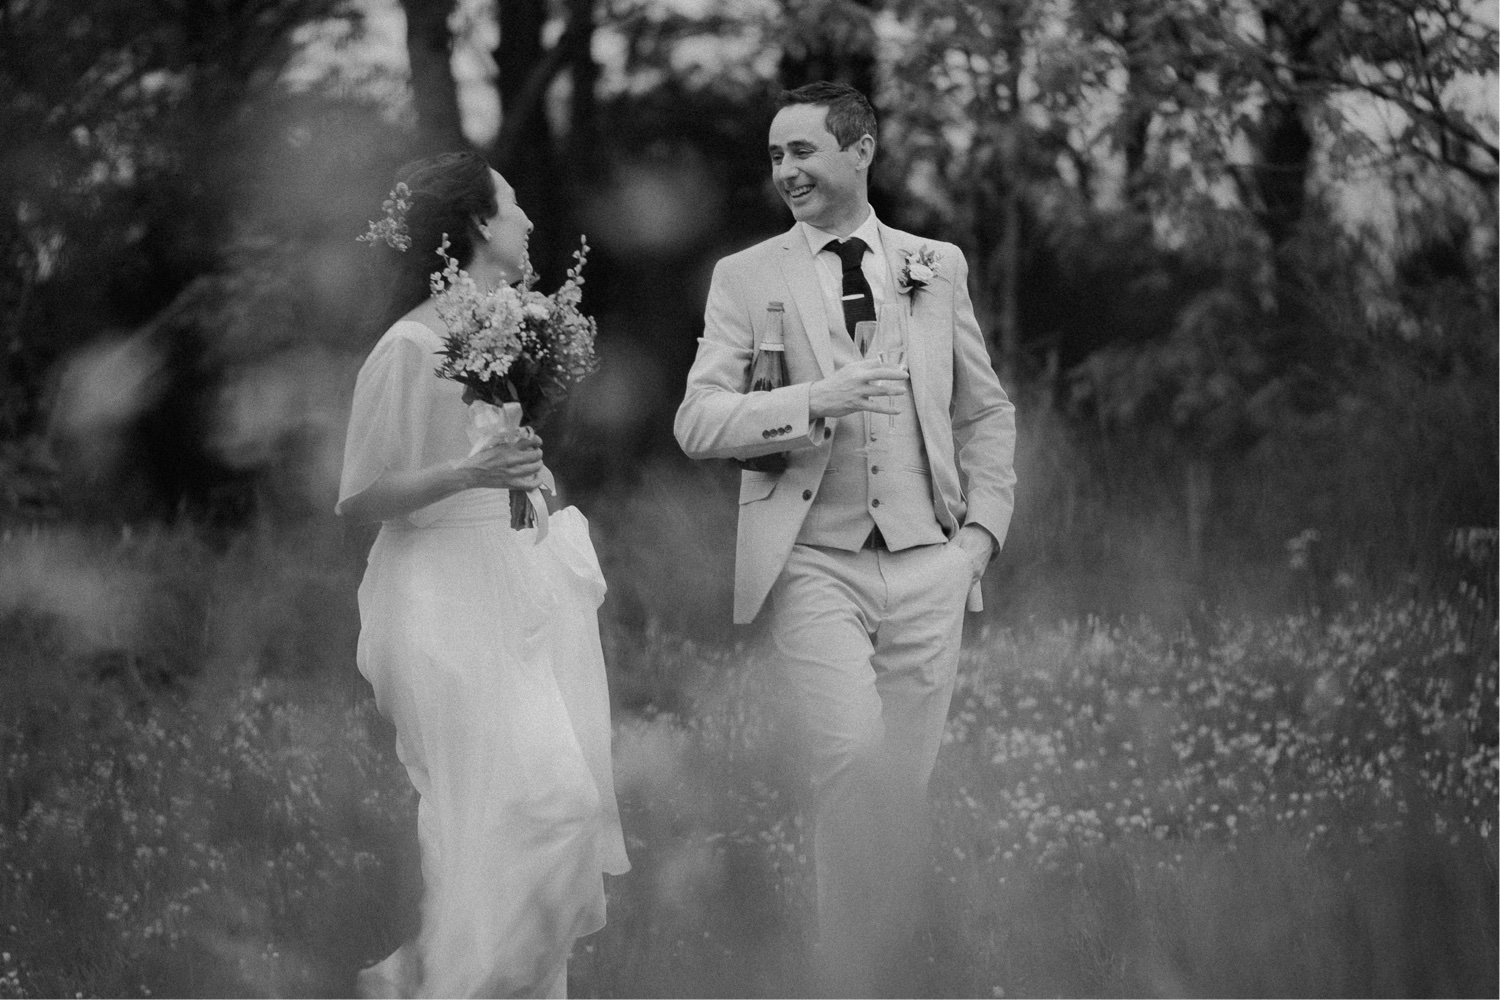 Wedding couple photographed in a field.